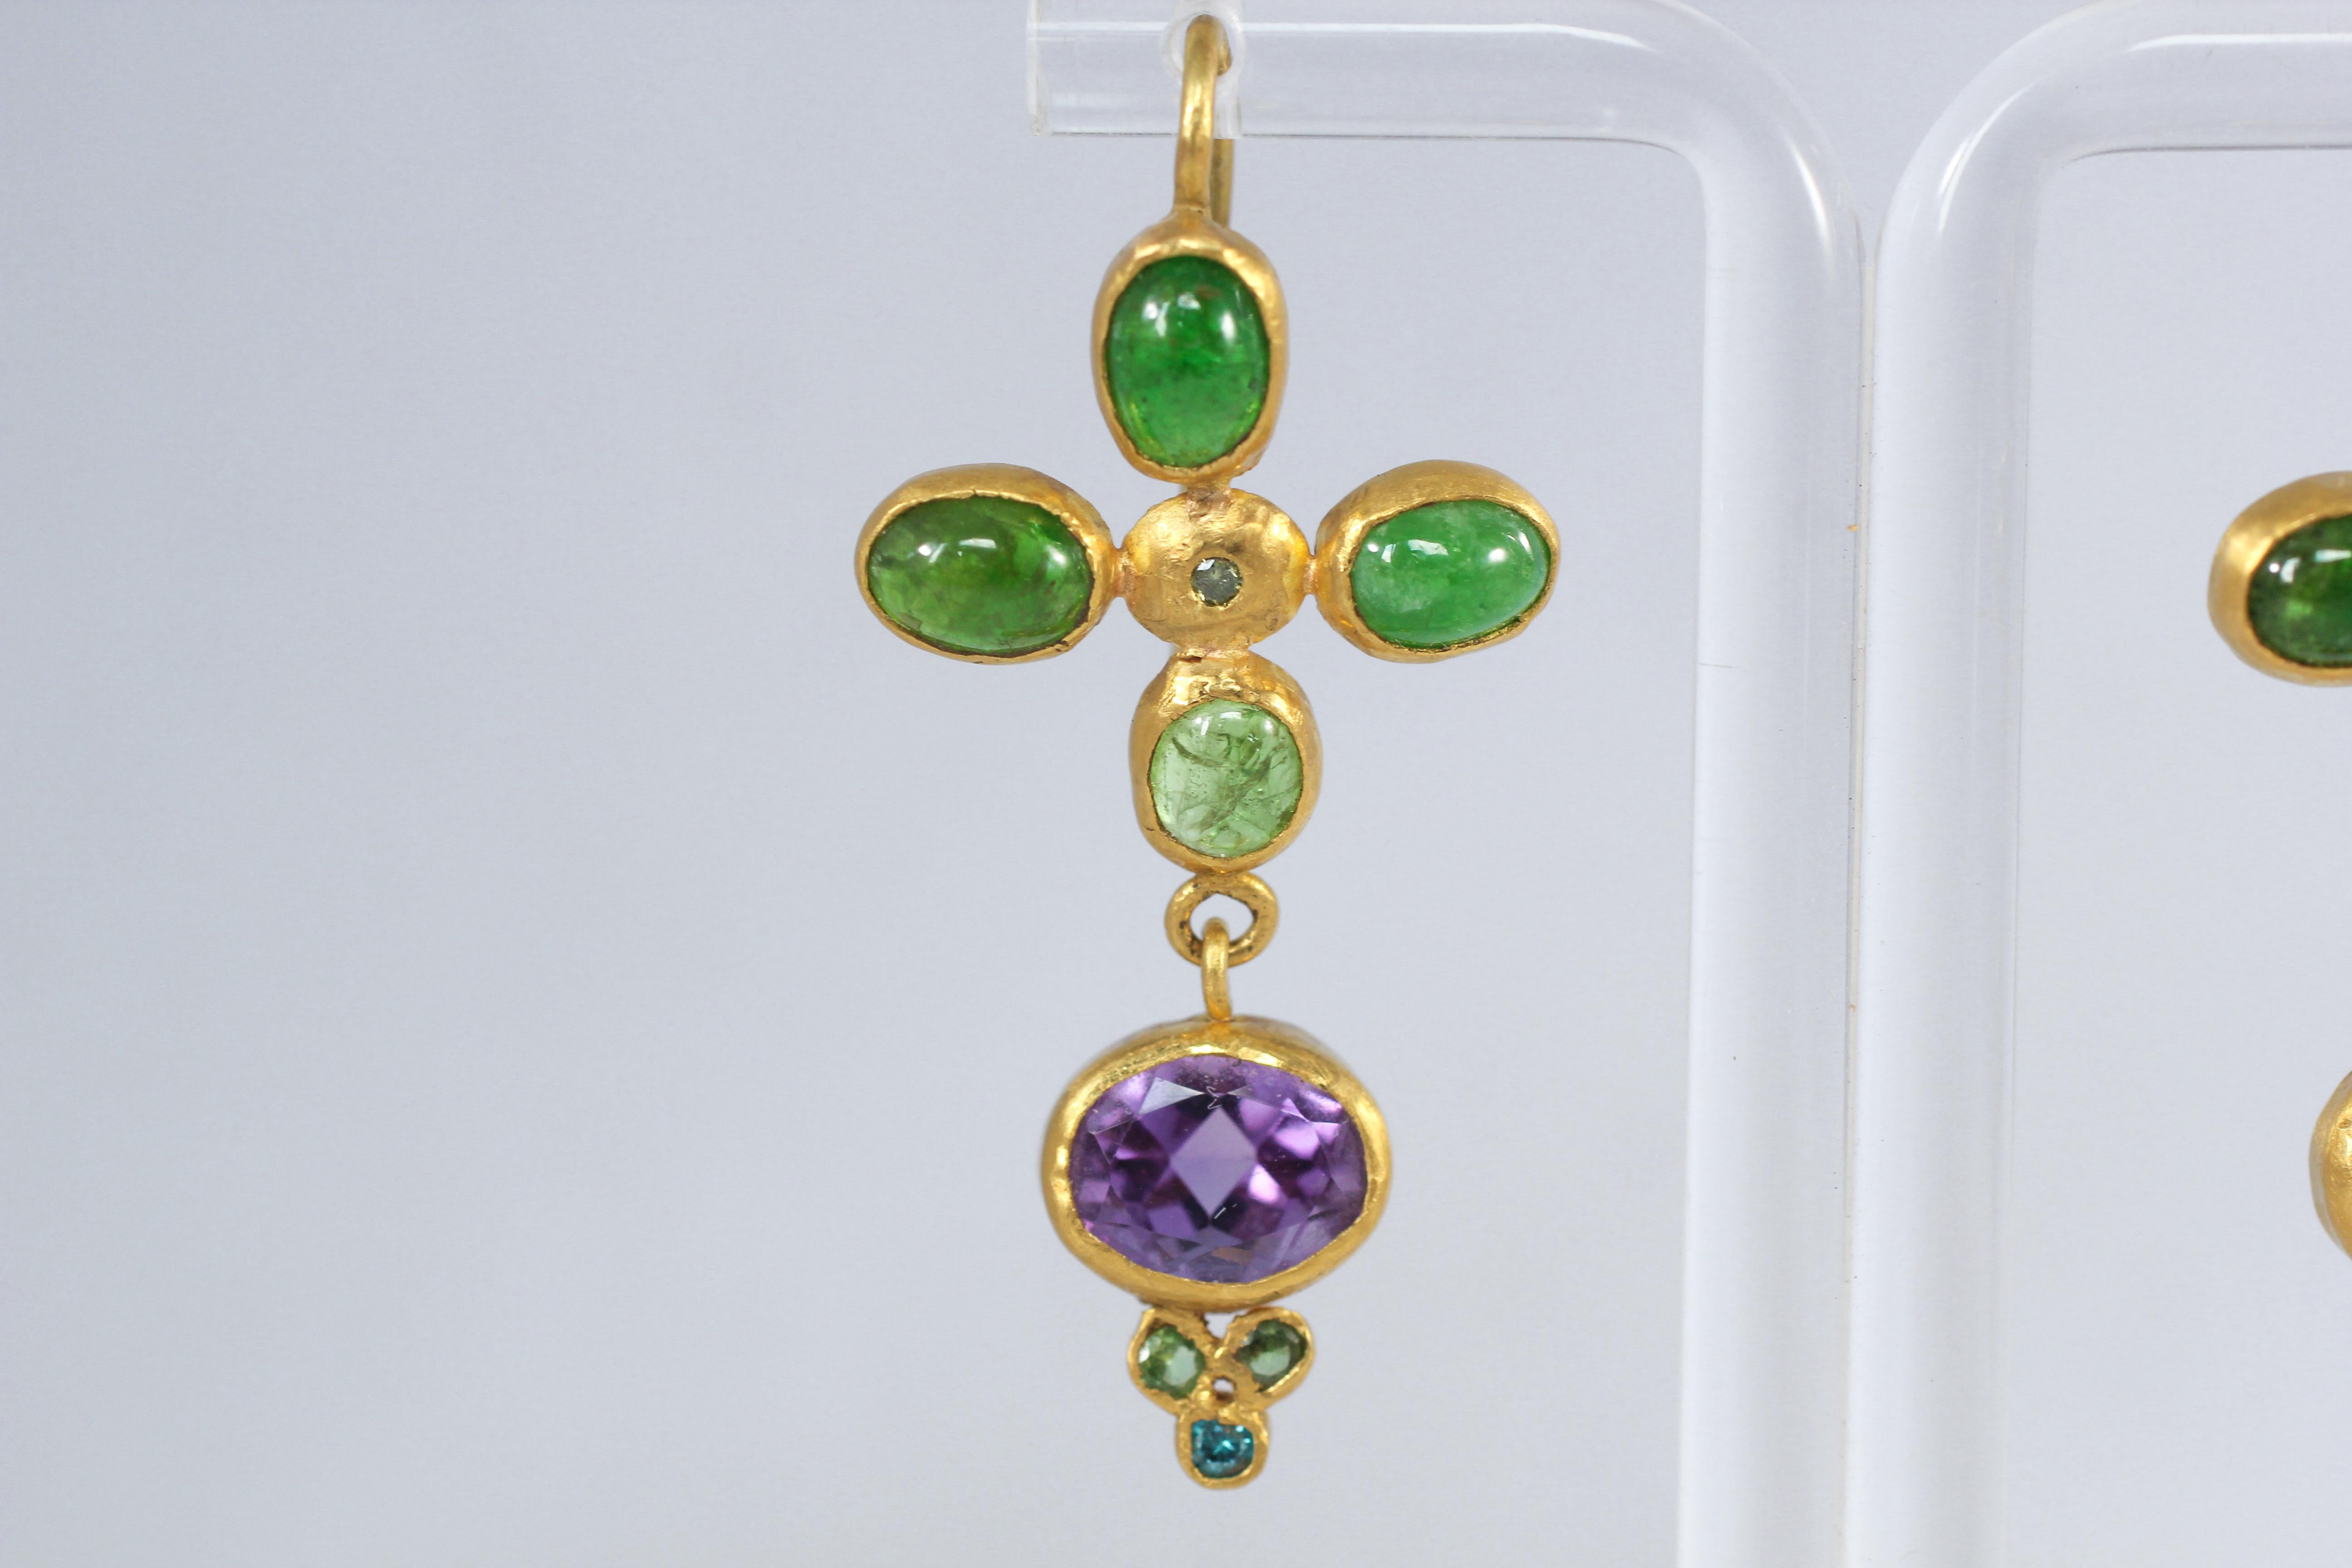 Hydrangea Earrings. Beautiful one-of-a-kind handmade 21K gold dangle drop earrings with bezel-set green garnets, amethysts, and blue diamonds. These earrings are an abstract interpretation of the flowering hydrangea. Feminine and elegant, these will